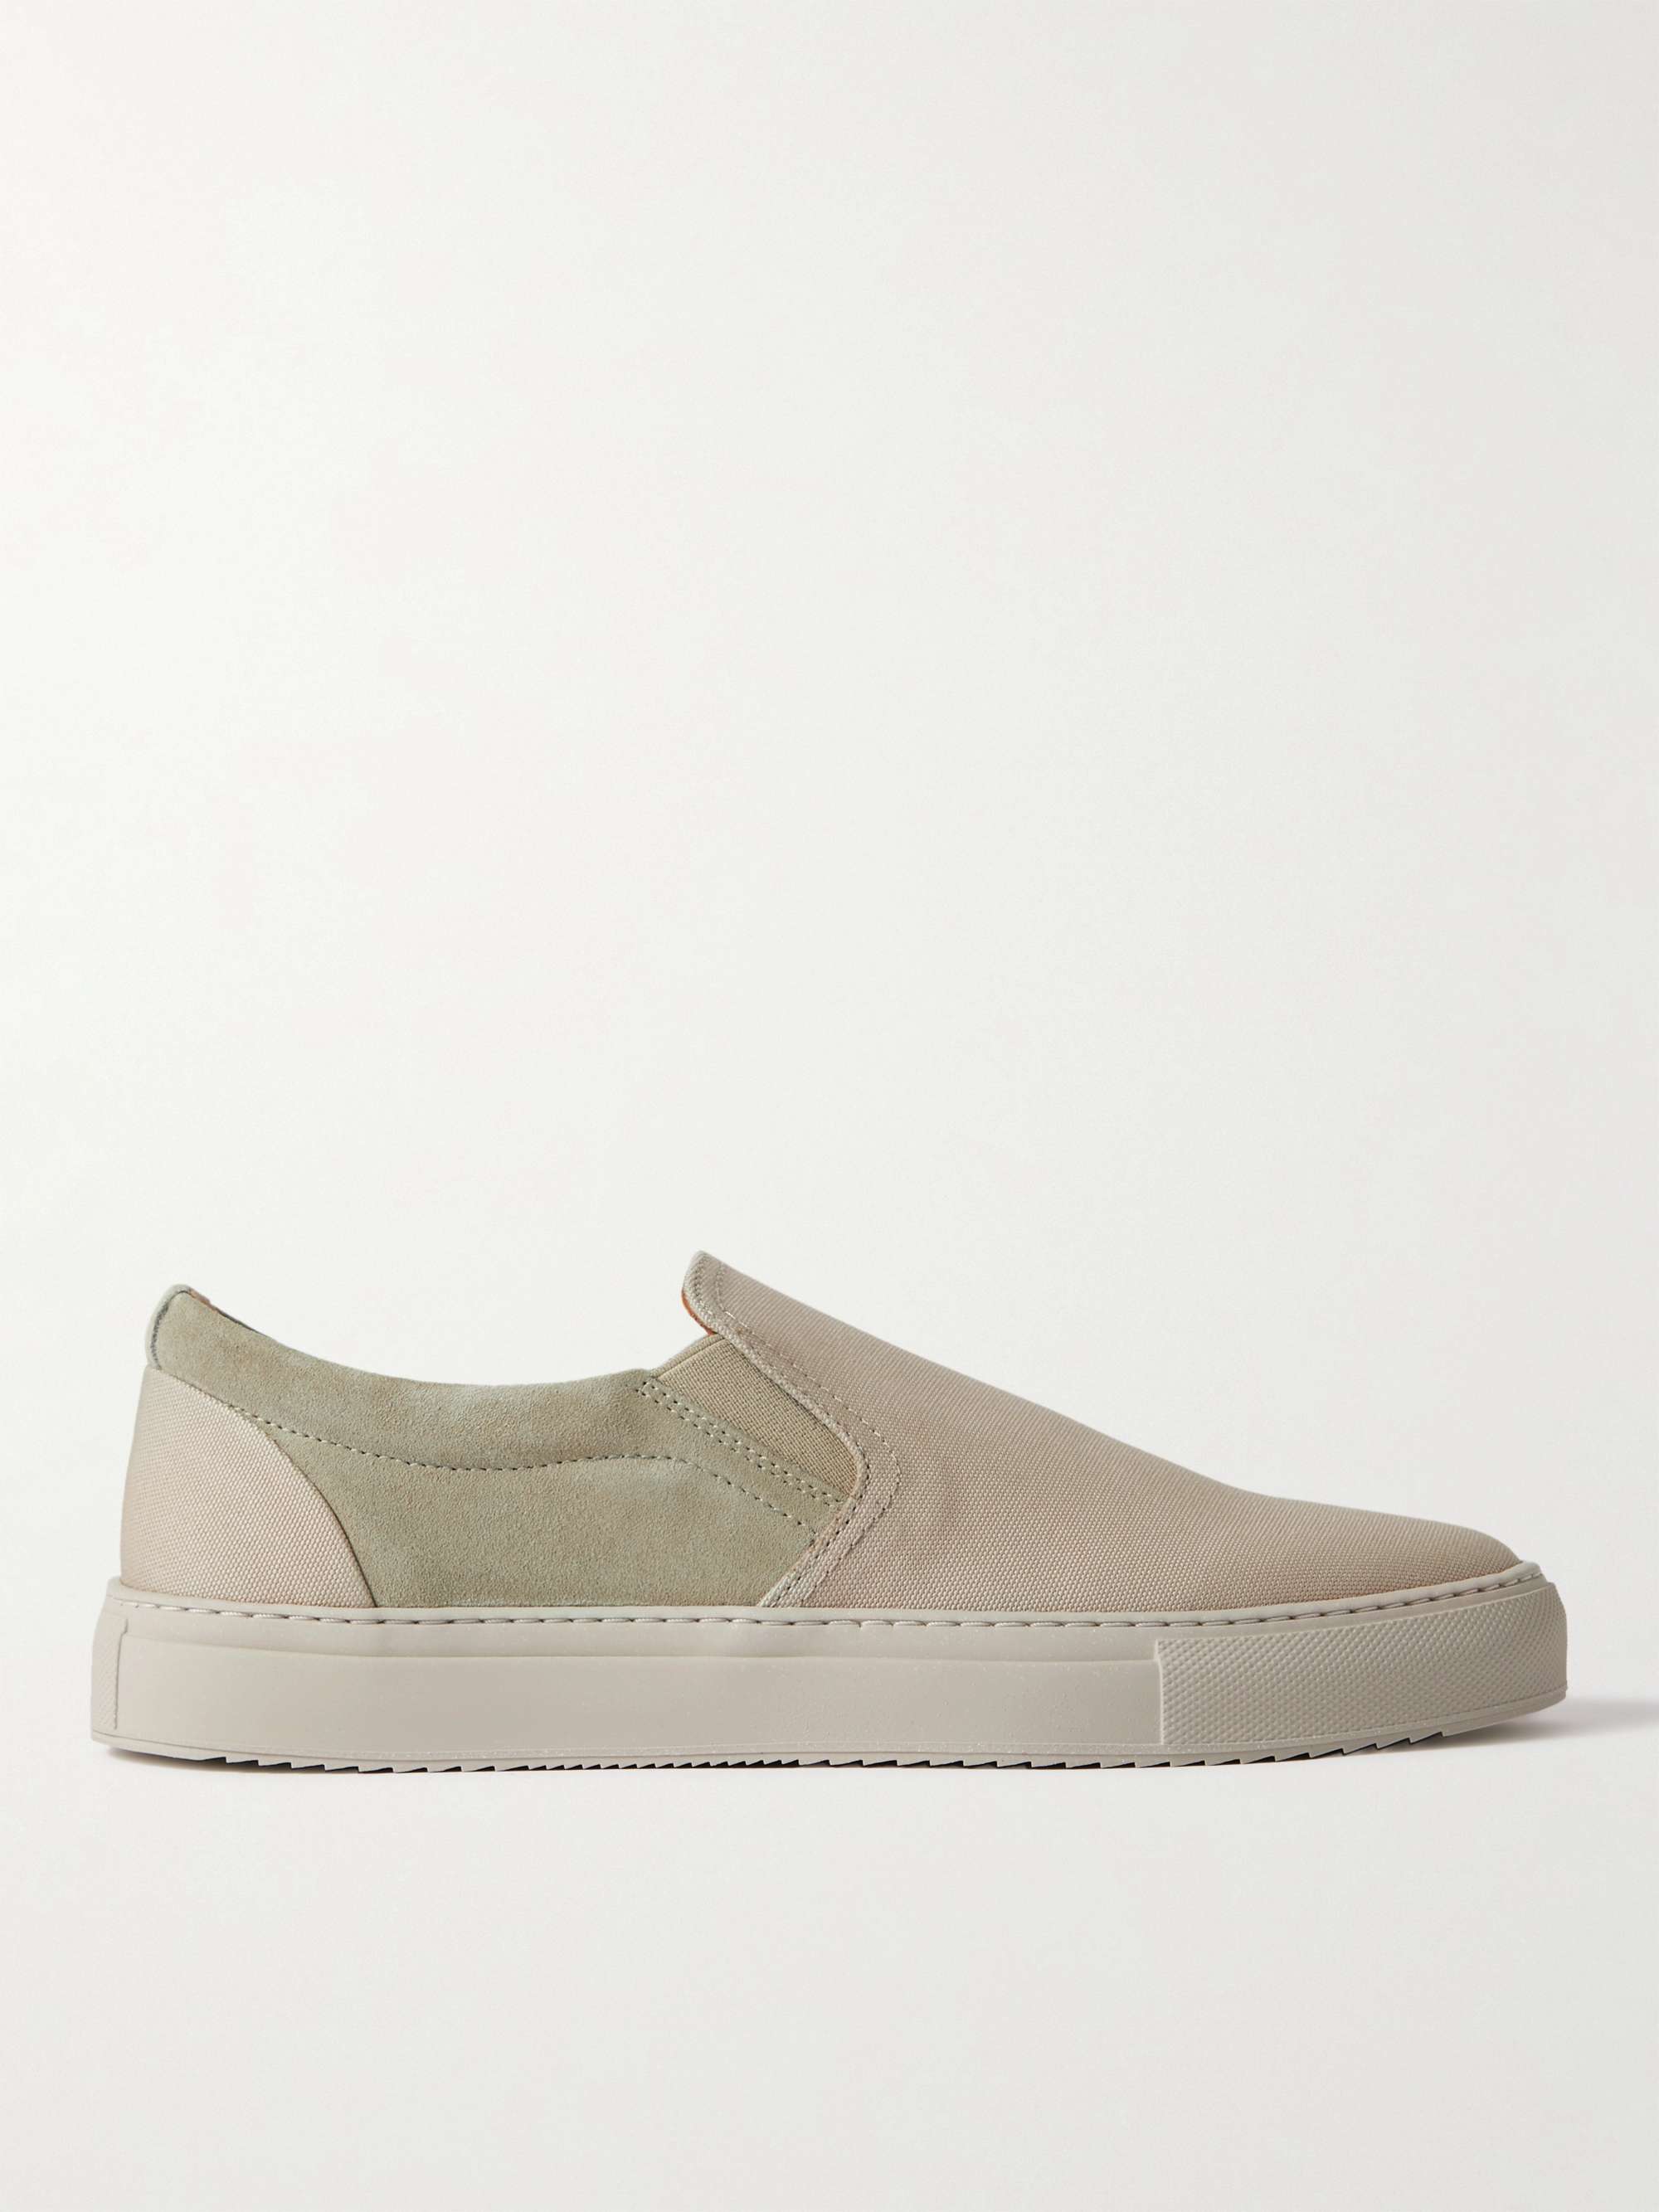 MR P. Larry Canvas and Suede Slip-On Sneakers for Men | MR PORTER